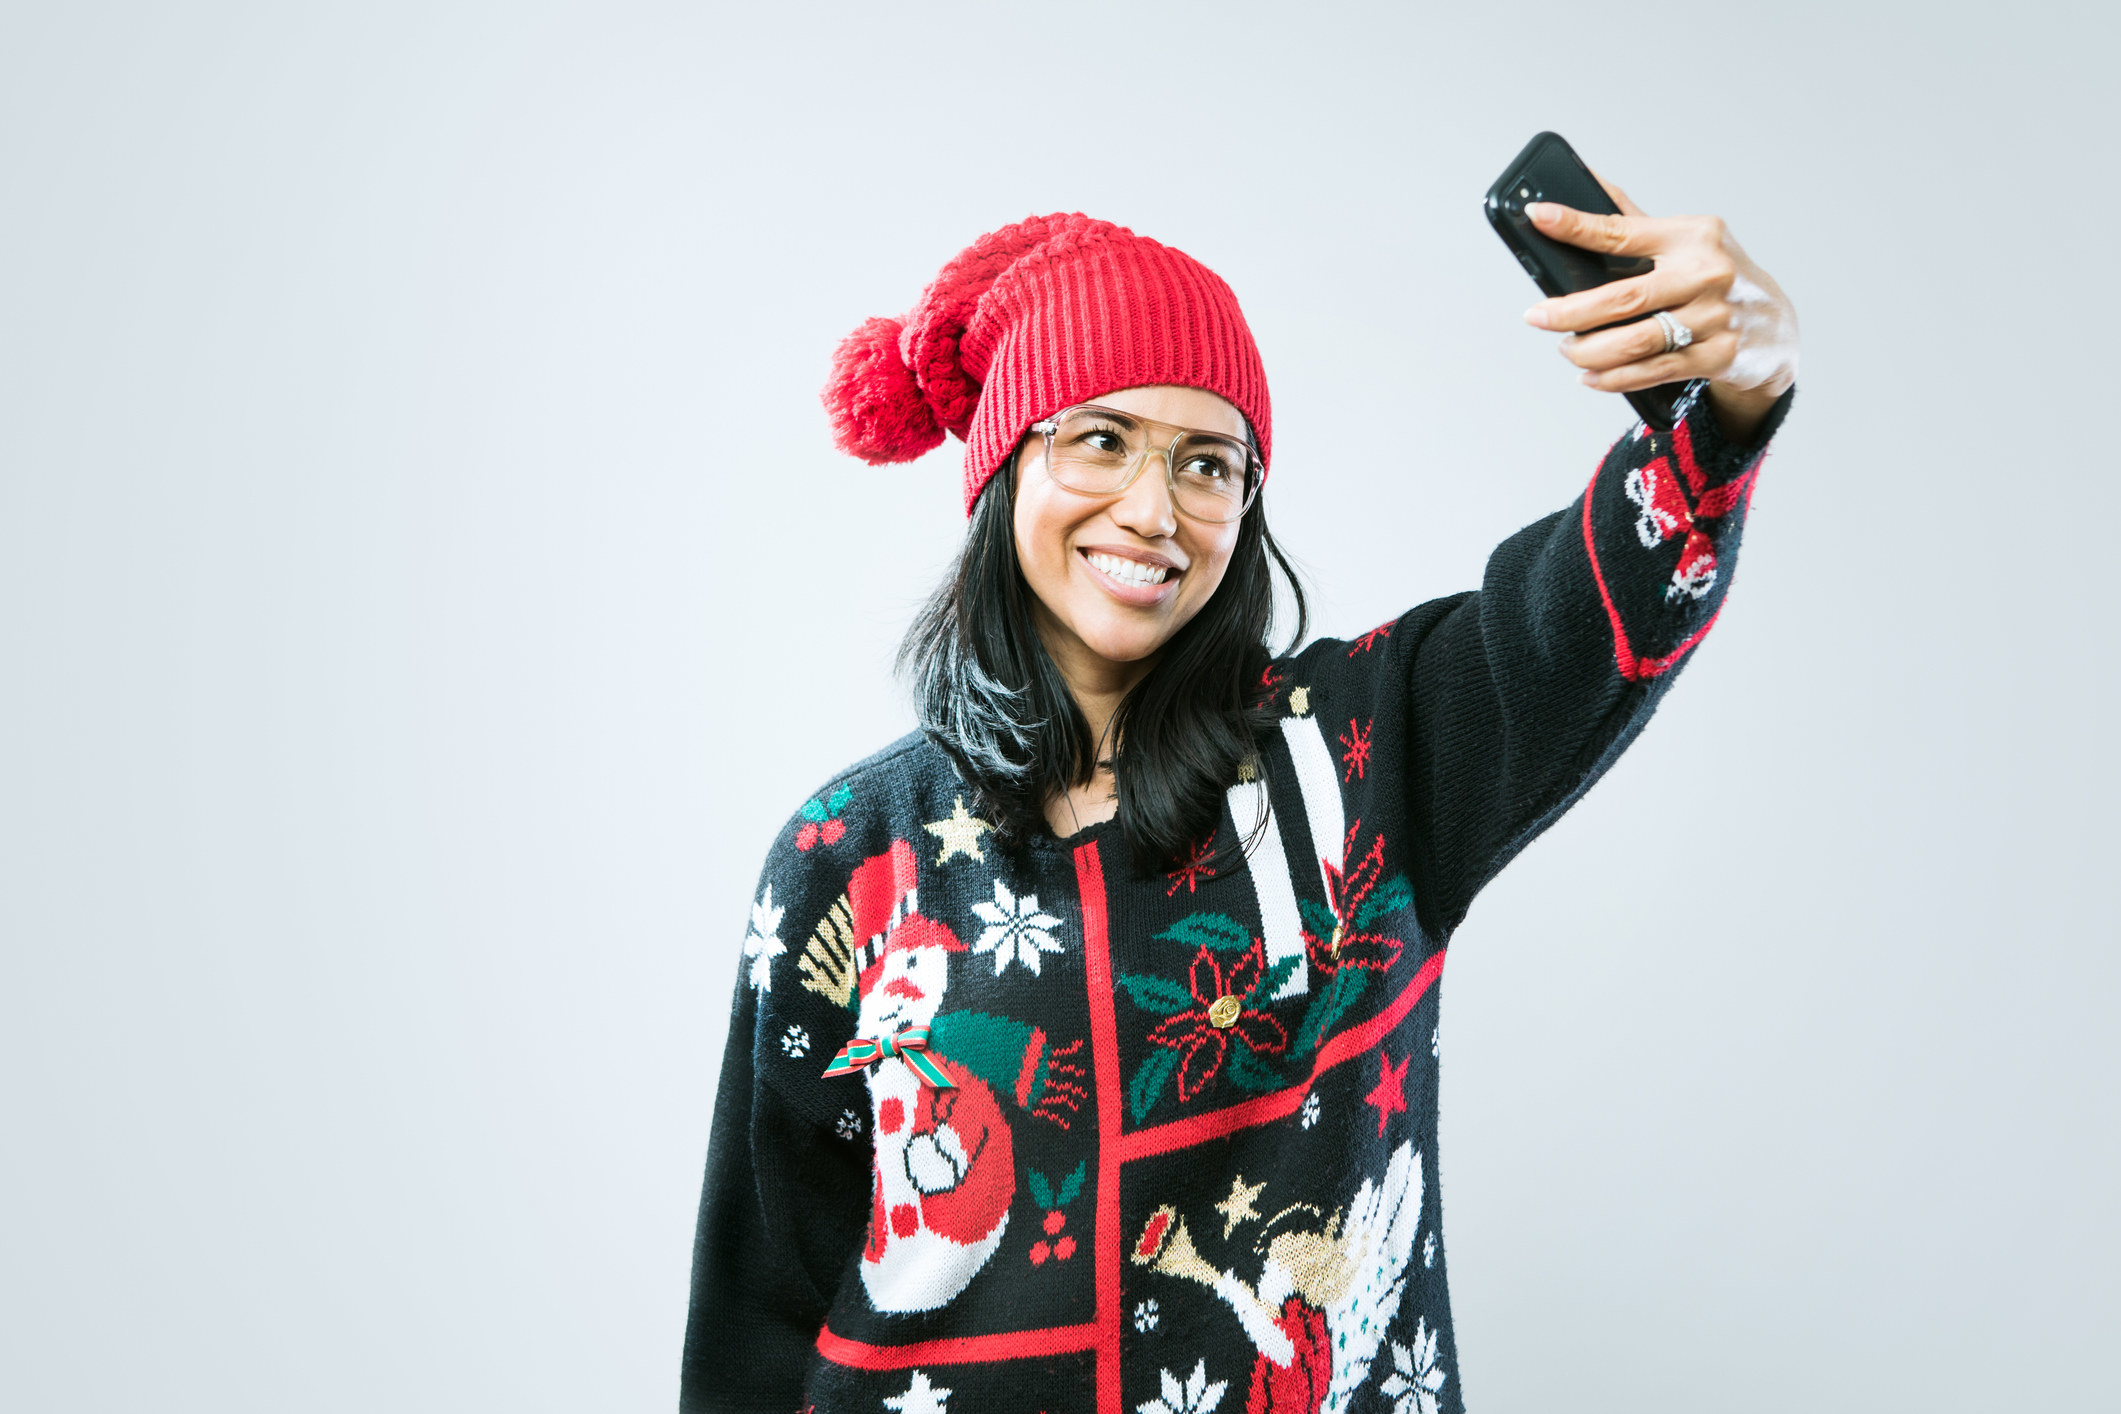 A person wearing a holiday-themed sweater and taking a selfie of their outfit